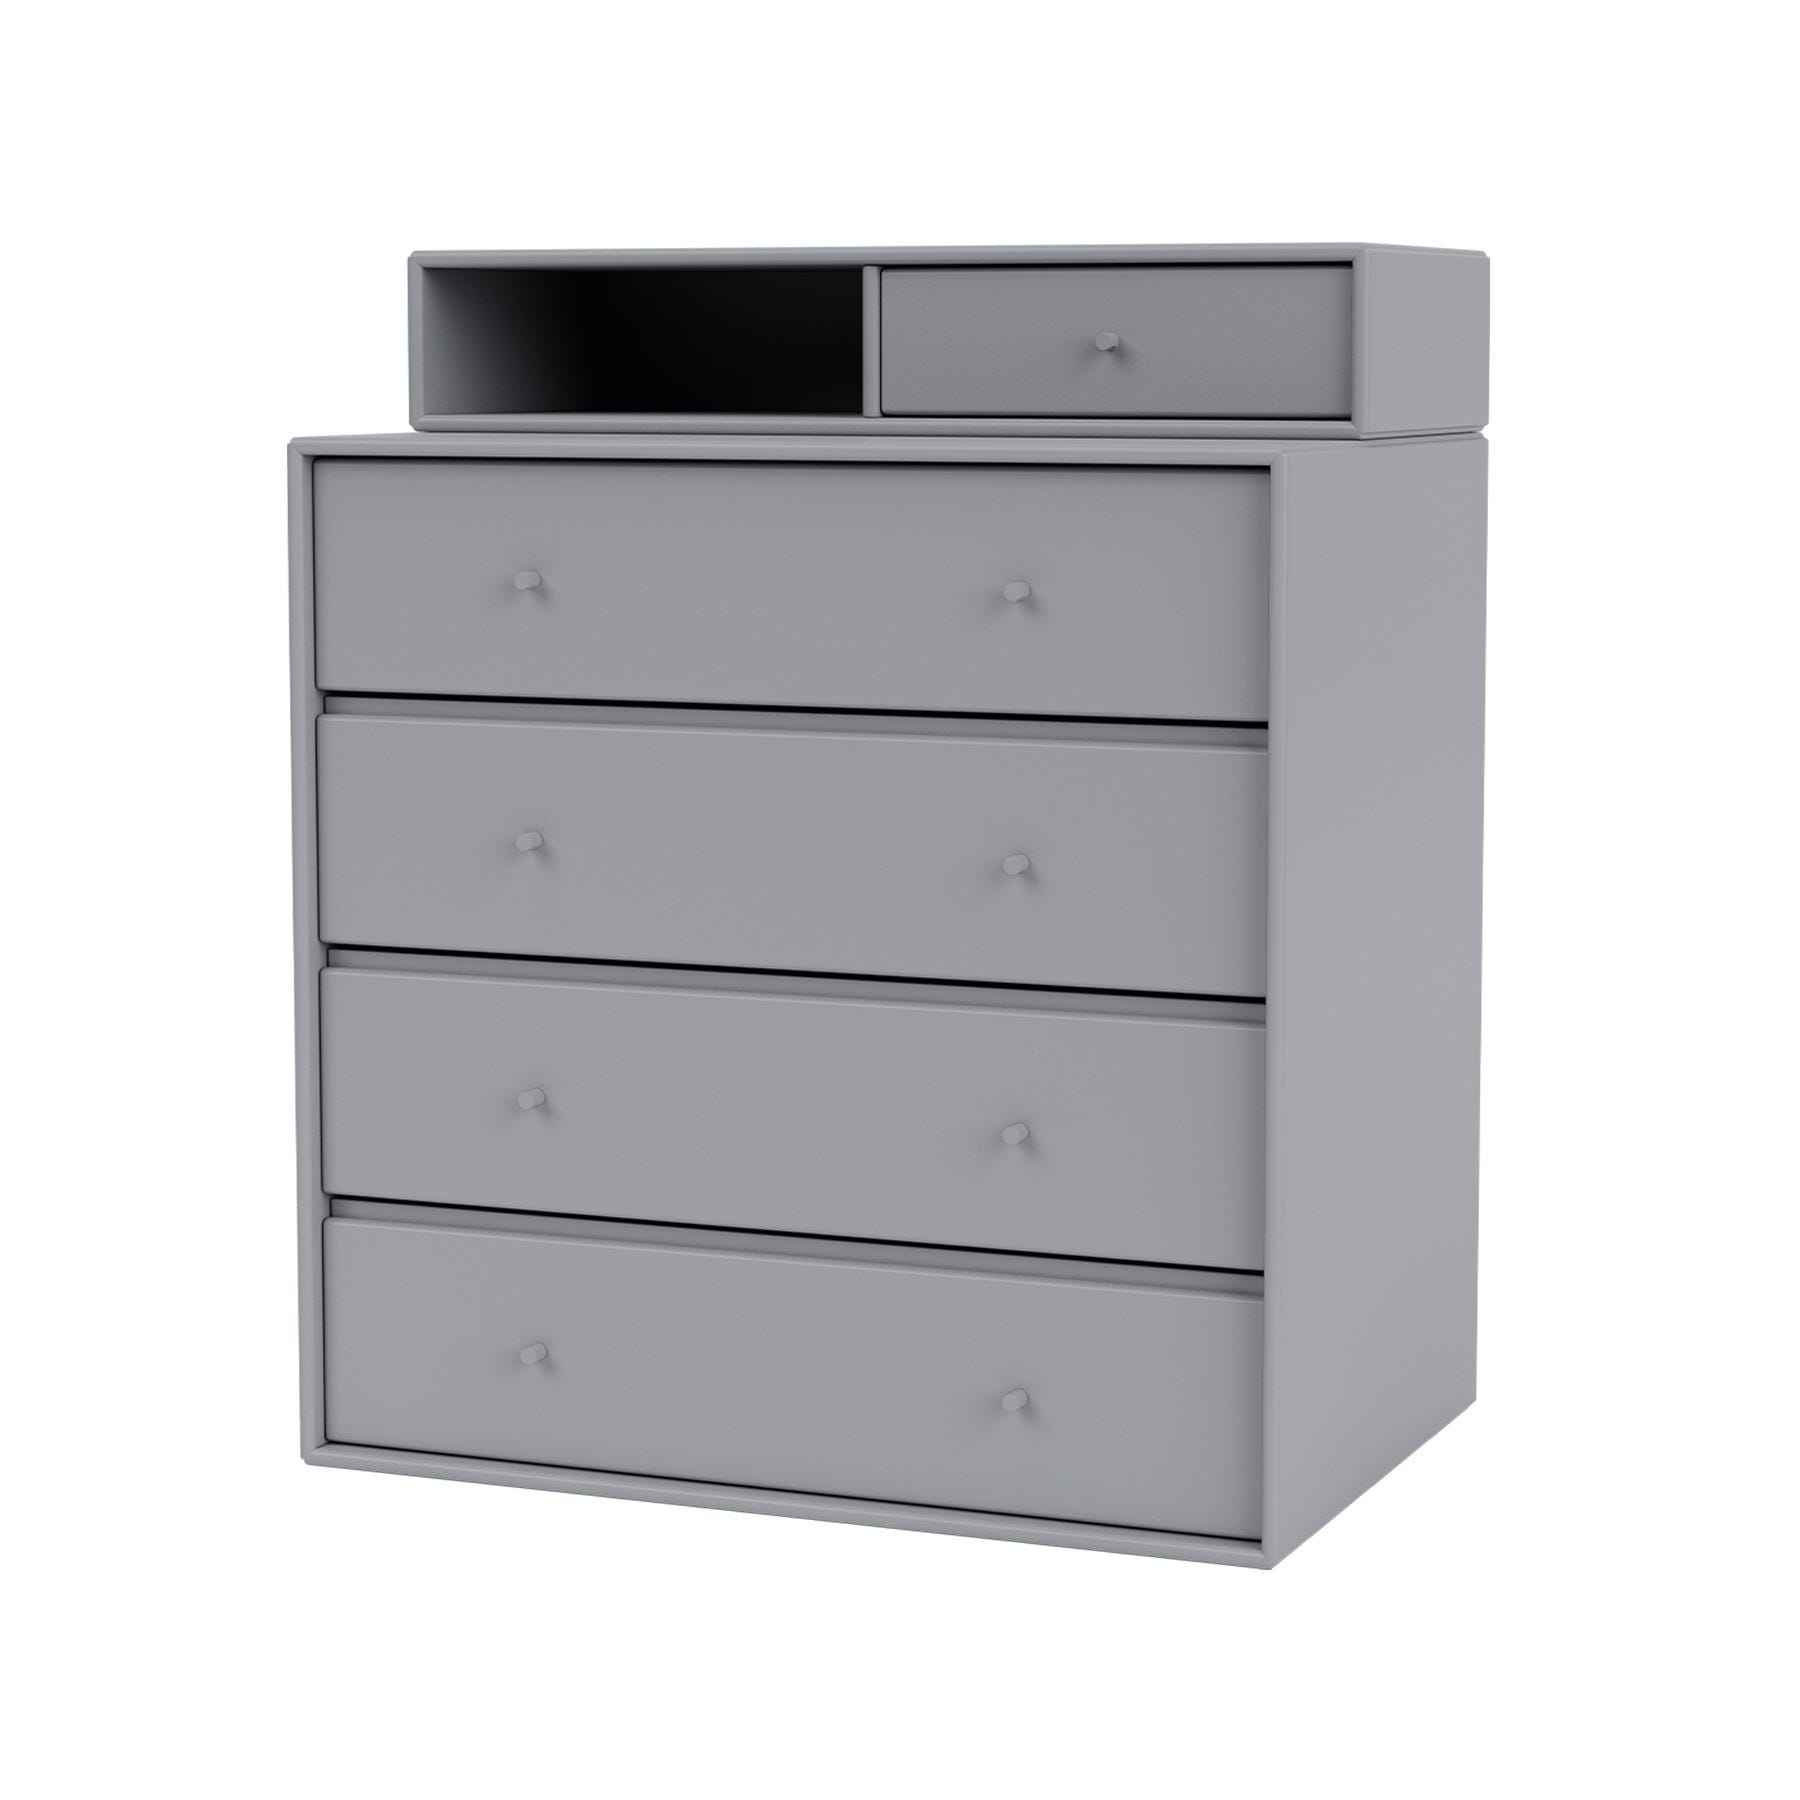 Montana Keep Chest Of Drawers Graphic Wall Mounted Grey Designer Furniture From Holloways Of Ludlow